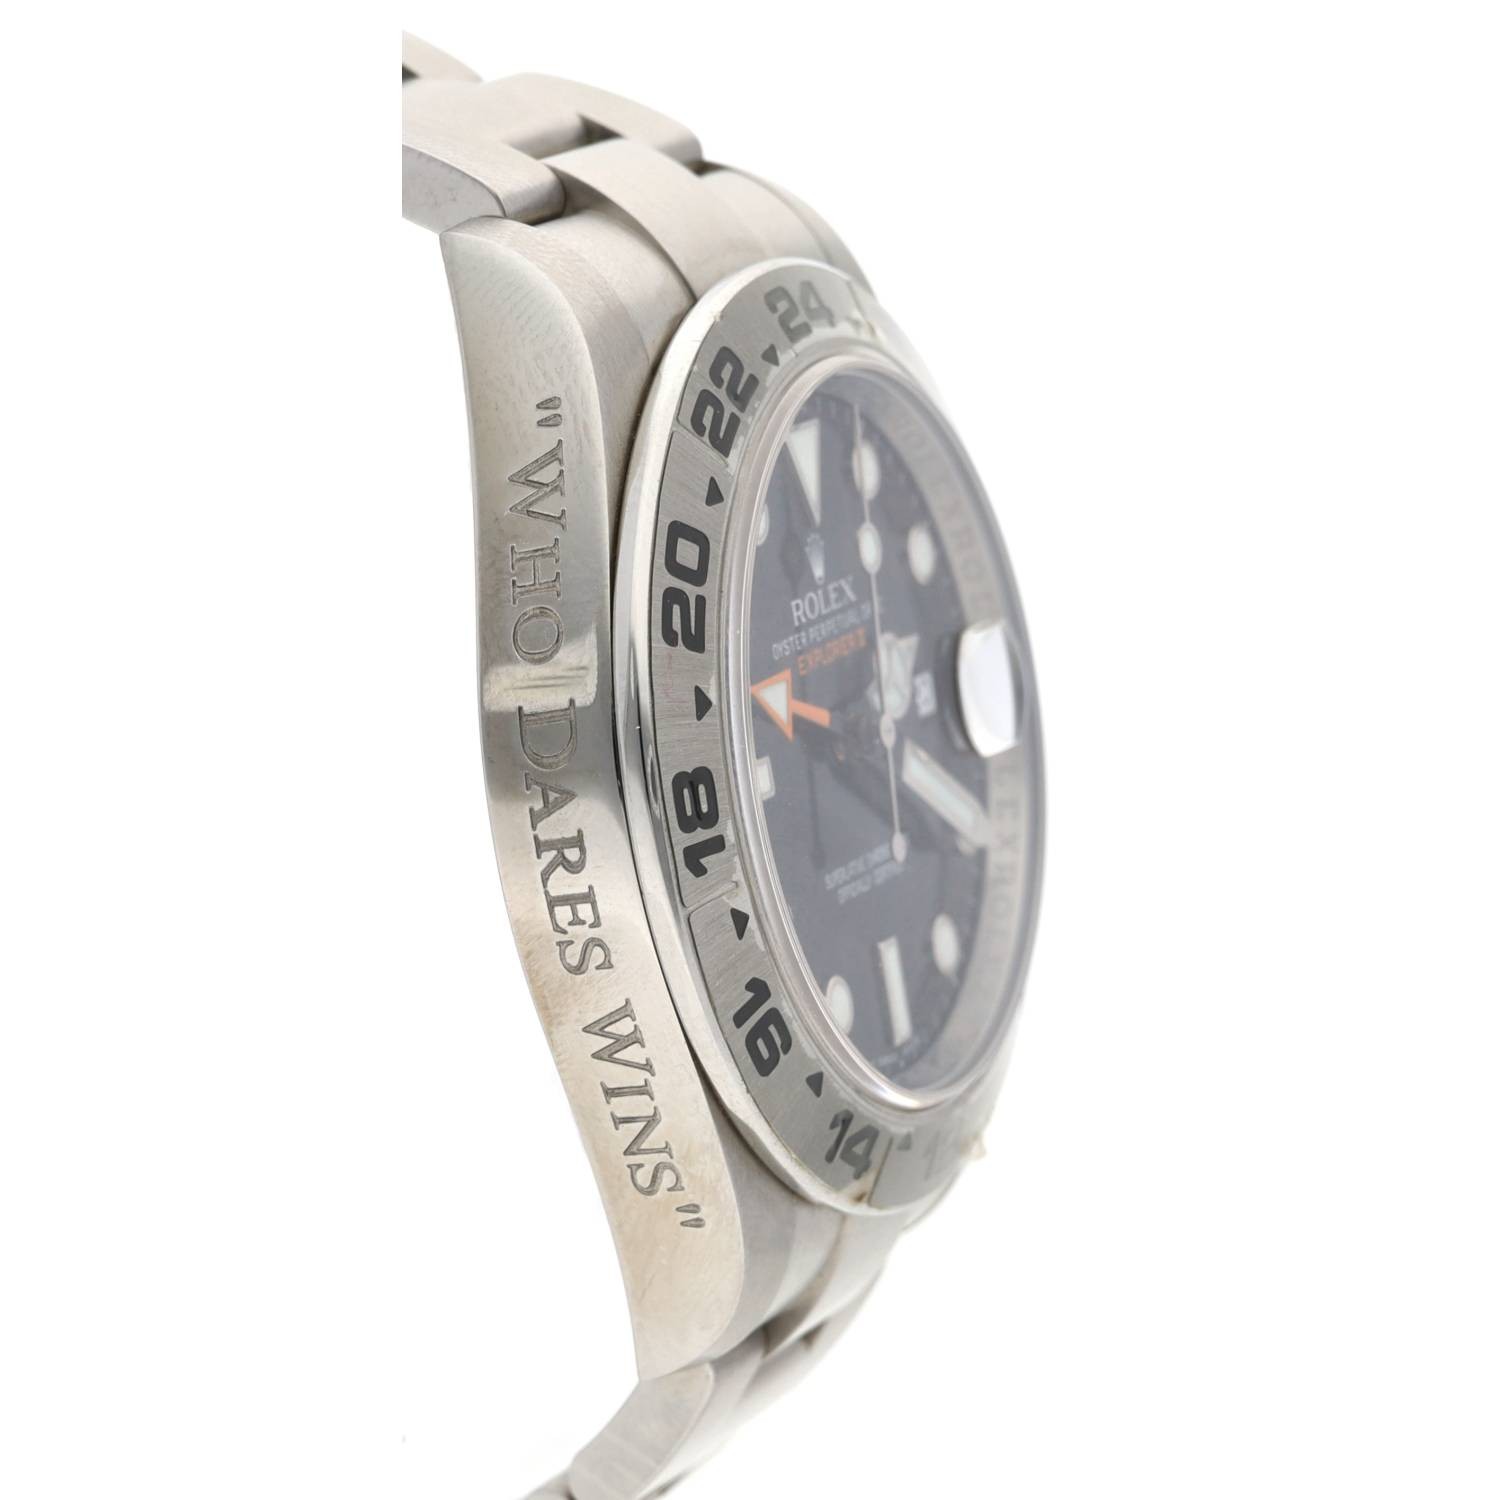 Rare Special Edition Military Commissioned Rolex Oyster Perpetual Date ‘SAS’ Explorer II stainless - Image 7 of 11